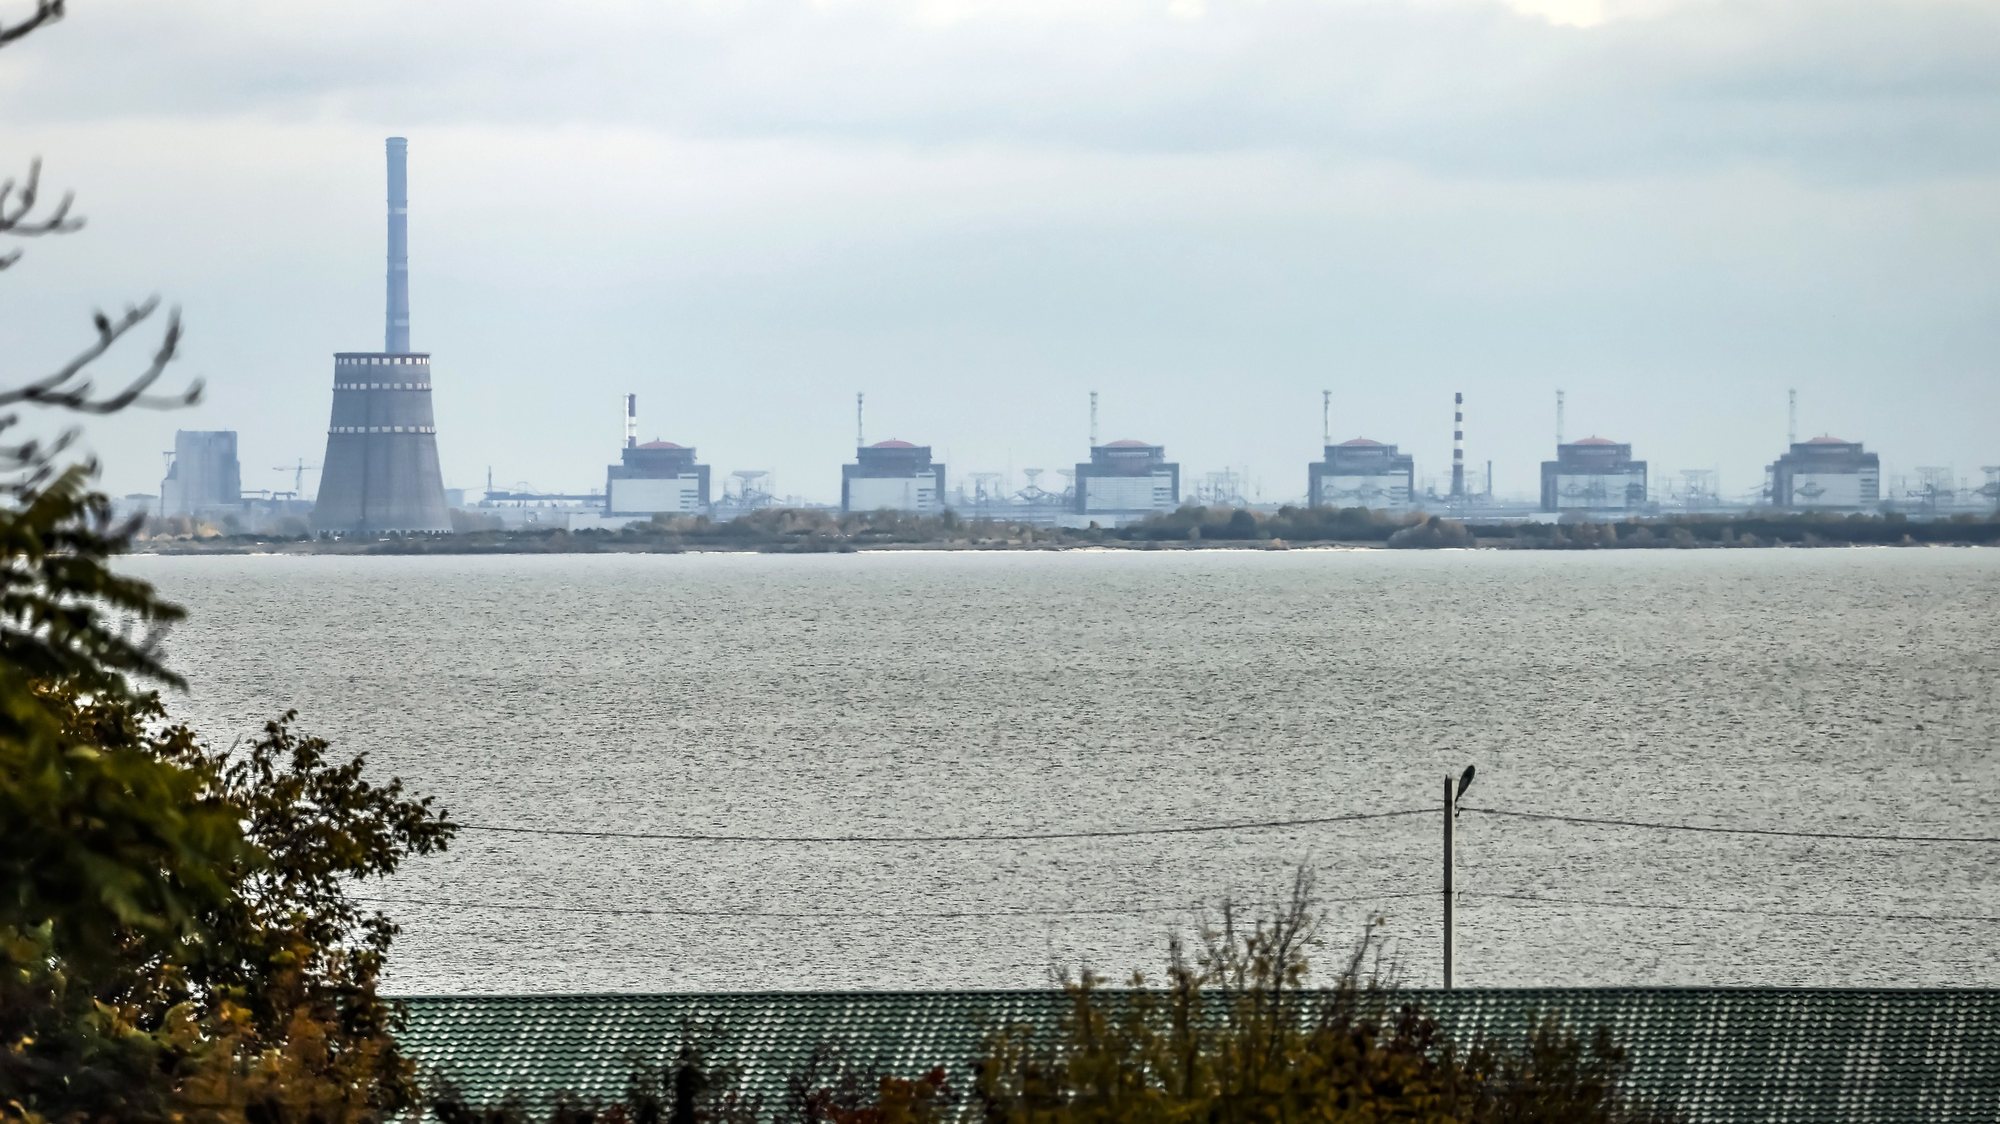 epa10271118 The Zaporizhzhia nuclear power plant (ZNPP) is seen from Nikopol, Ukraine, 28 October 2022. According to a statement by IAEA director general chief Grossi from 28 October 2022, engineers at the ZNPP have been working to stabilize the facility’s external power supplies. The plant has received the power needed to cool the reactors &quot;directly and without interruption from the national grid,&quot; the nuclear watchdog&#039;s chief said. Russian troops on 24 February entered Ukrainian territory, starting a conflict that has provoked destruction and a humanitarian crisis.  EPA/HANNIBAL HANSCHKE